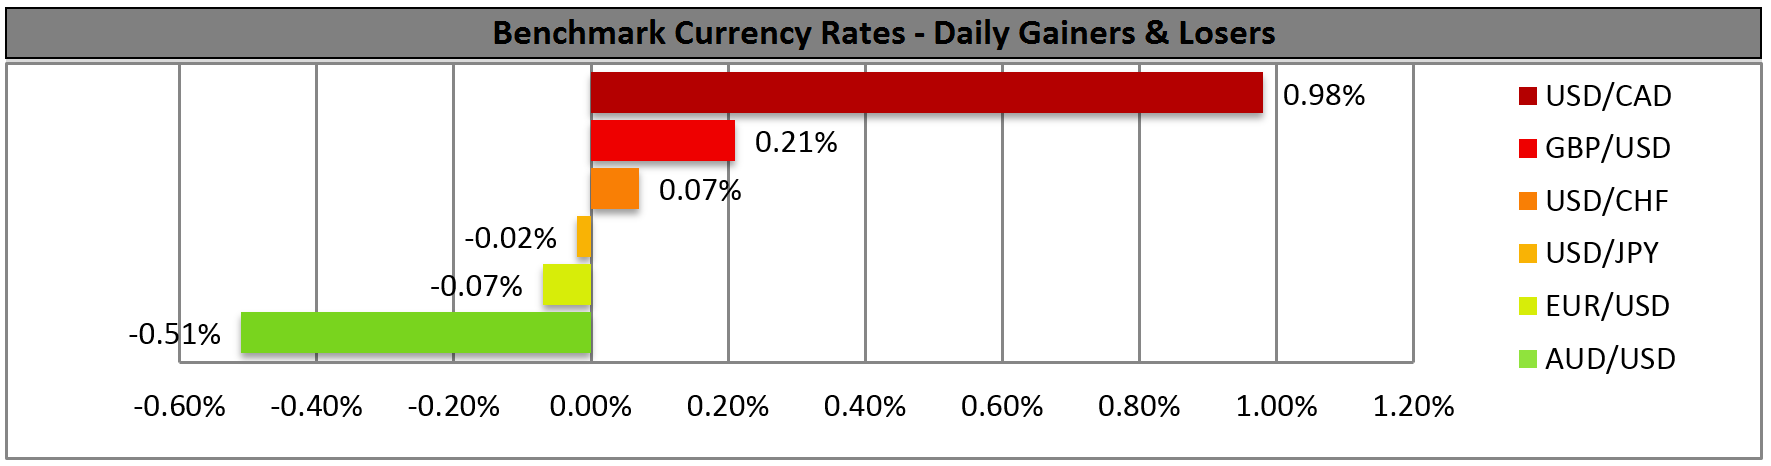 Benchmark Currency Rate